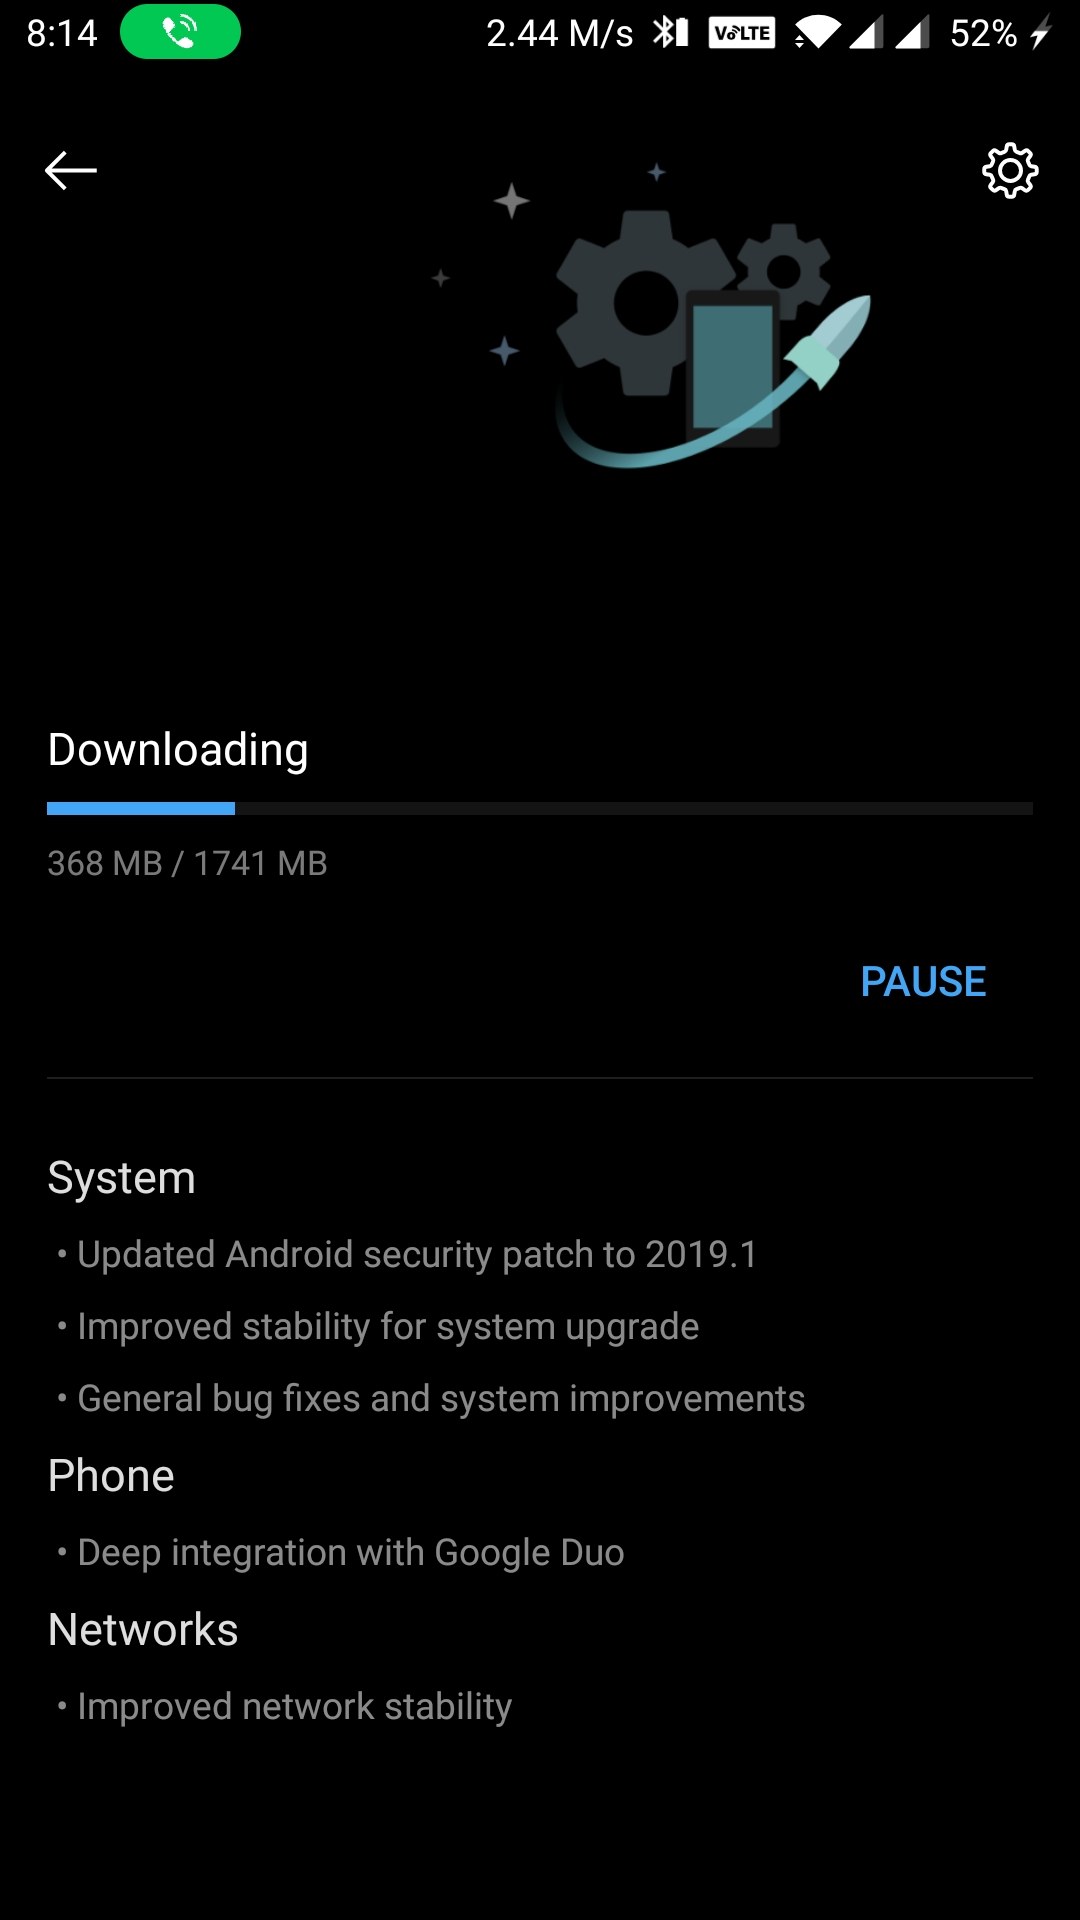 oneplus_5_oos_9.0.4_download